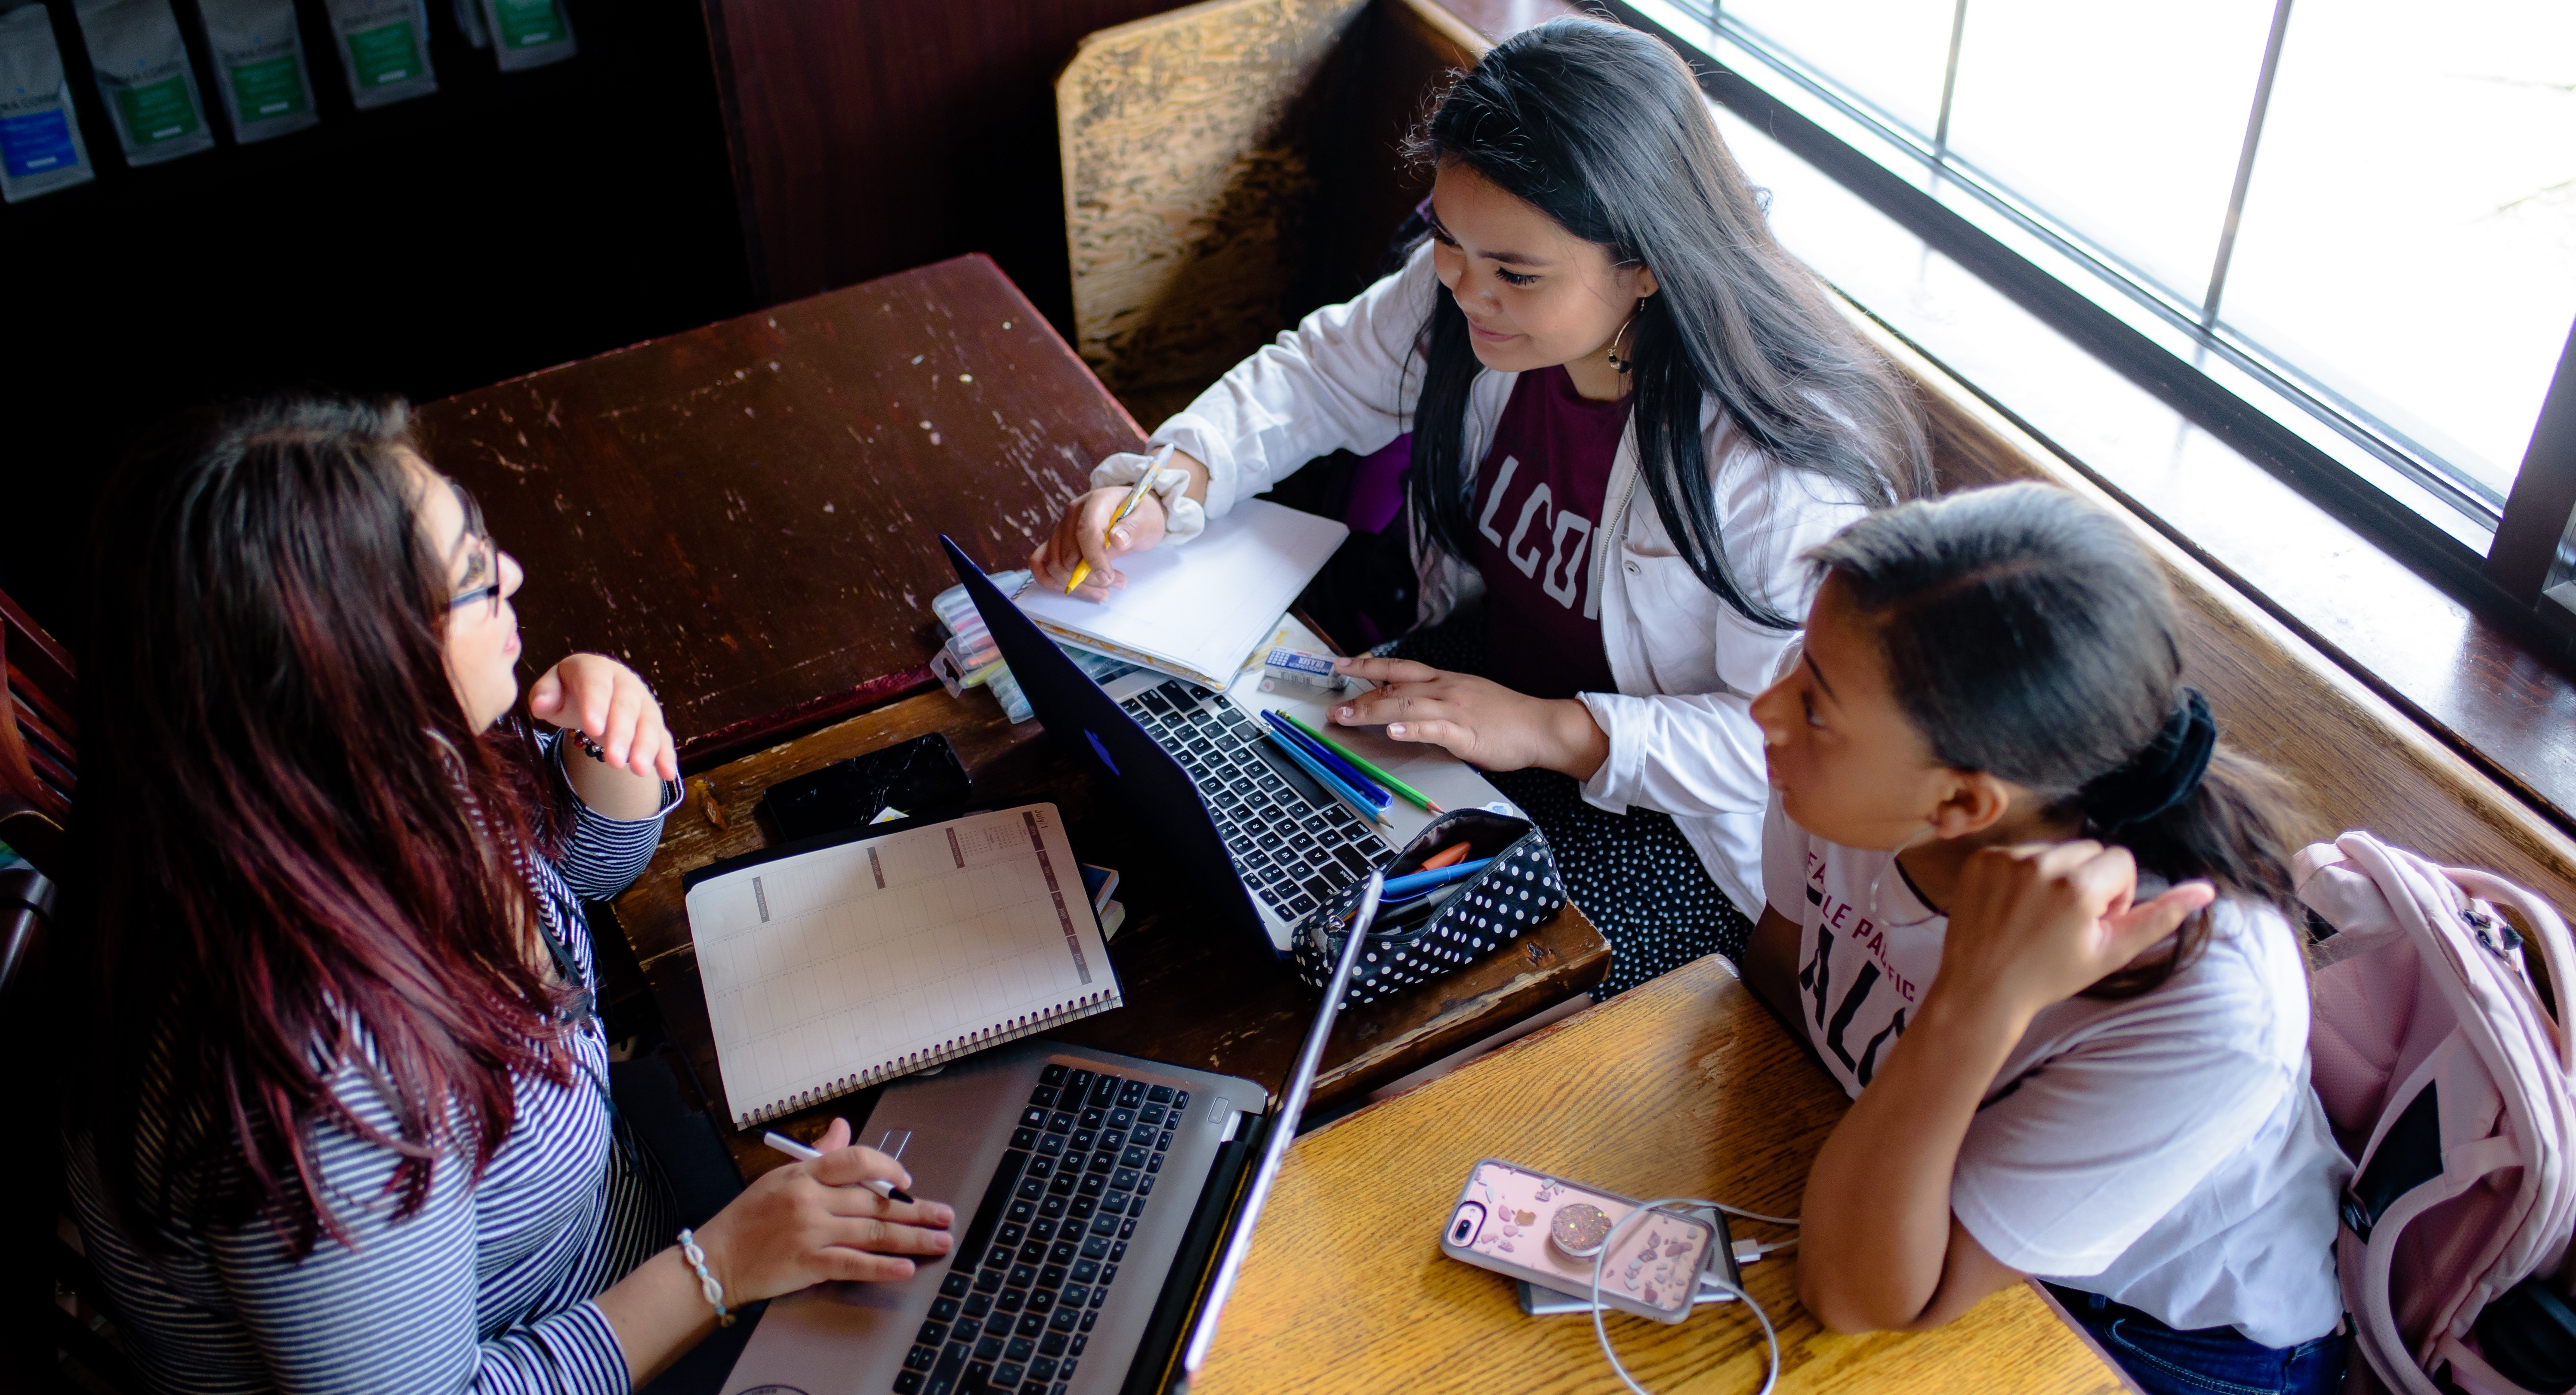 Three students study together at a cafe table